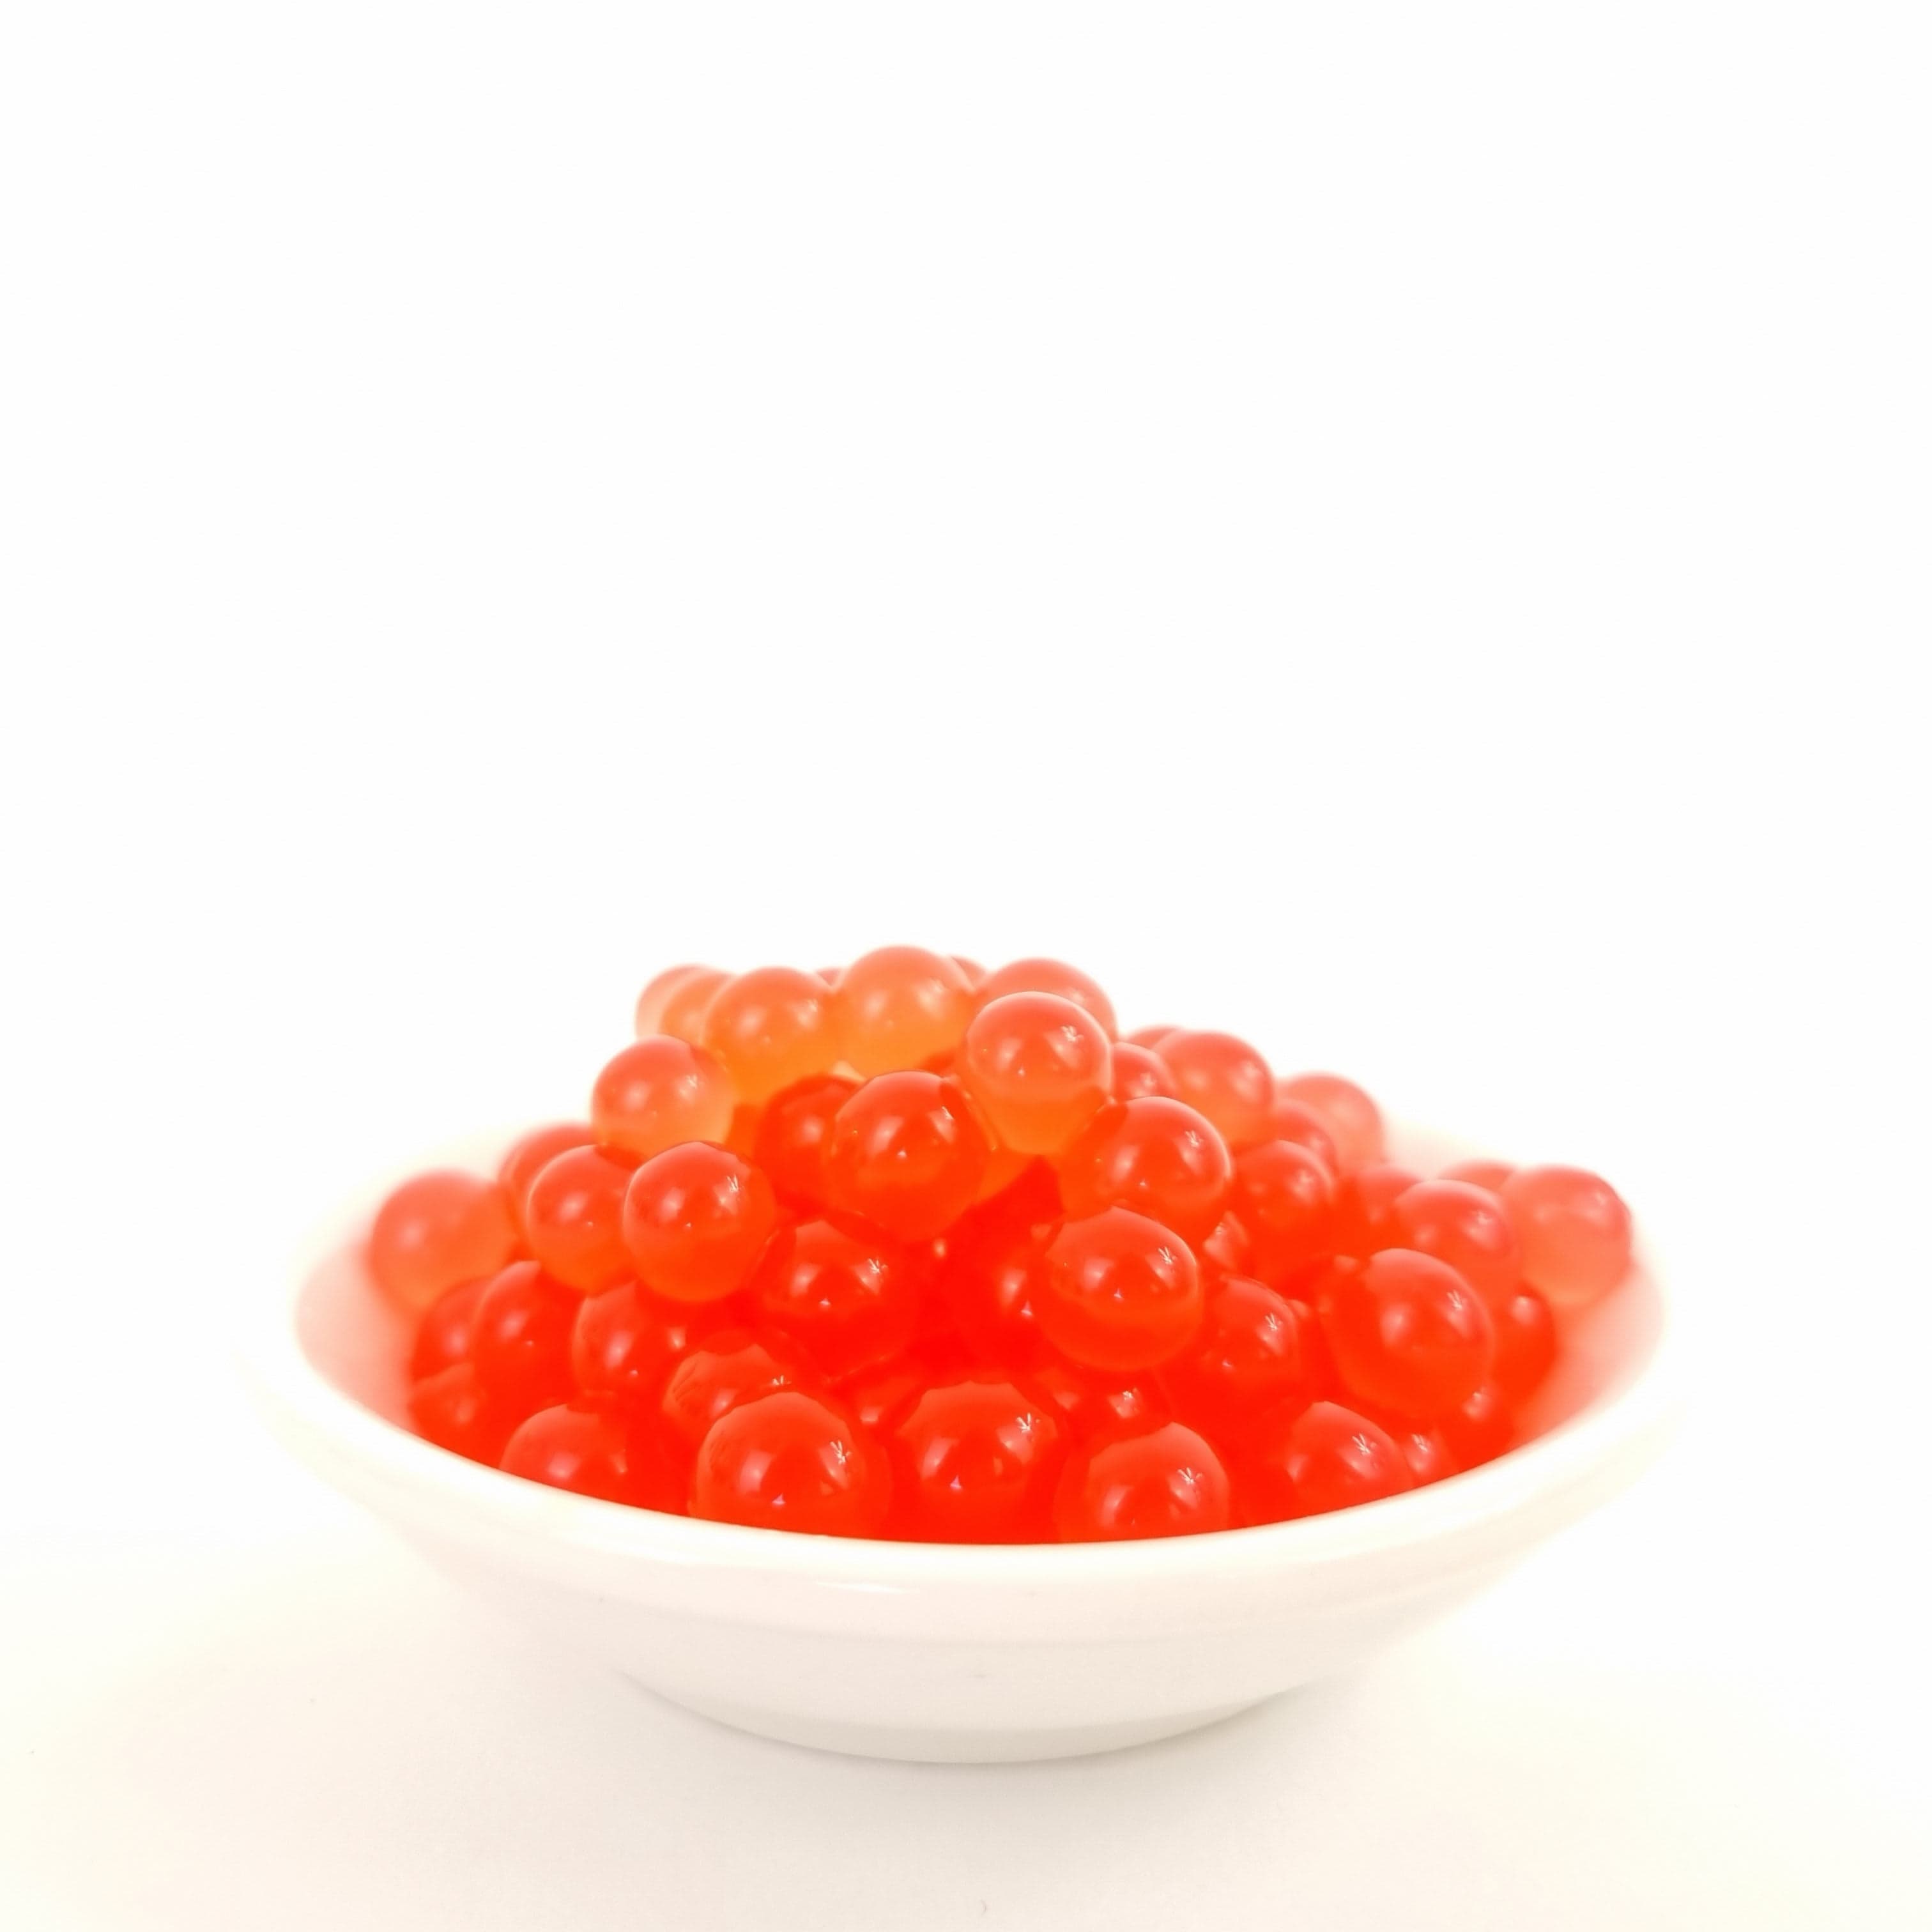 Tempo Toppings Strawberry Popping Boba 450g - serves 6